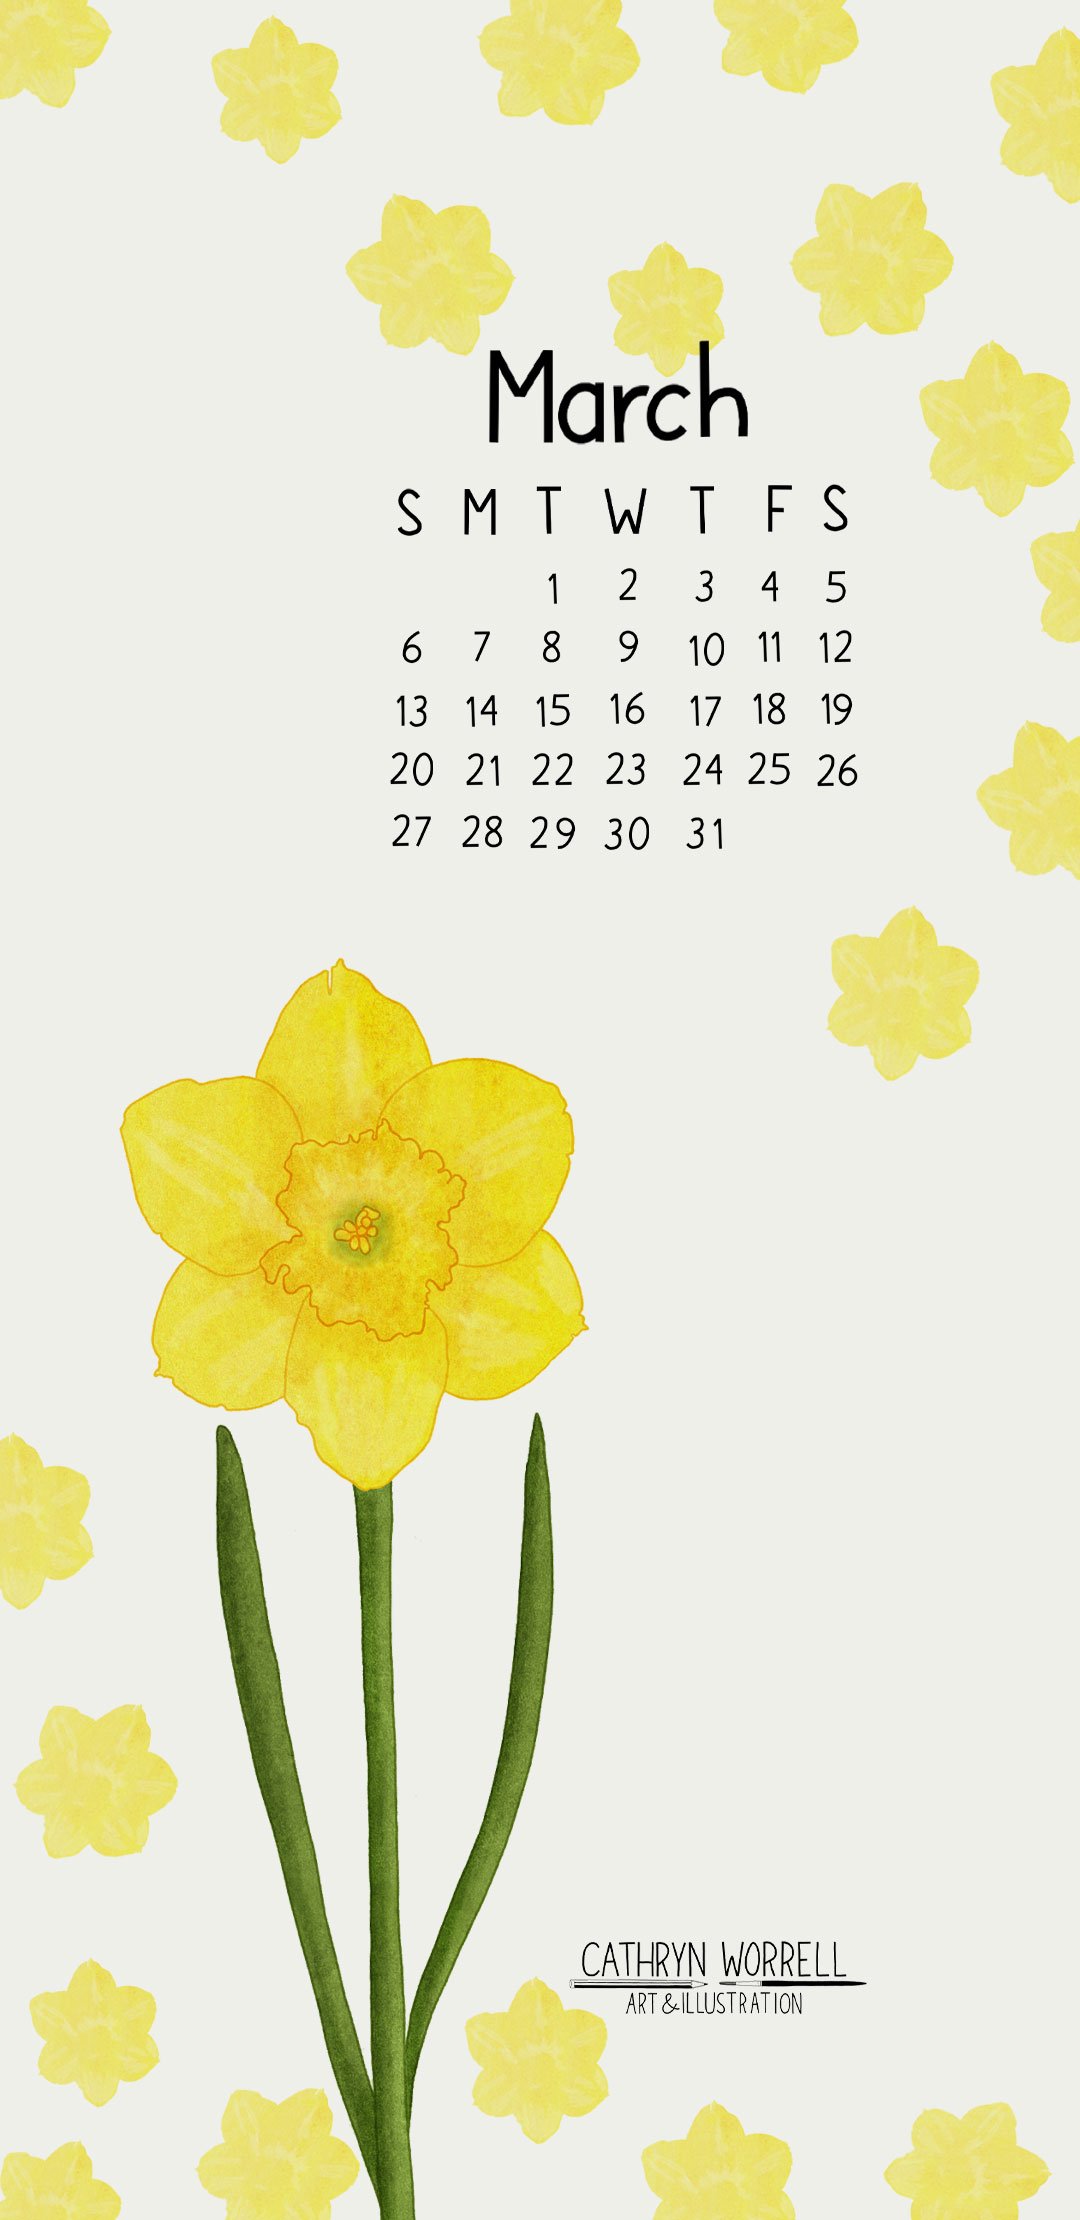 Phone wallpaper and calendar for March — Cathryn Worrell Art & Illustration